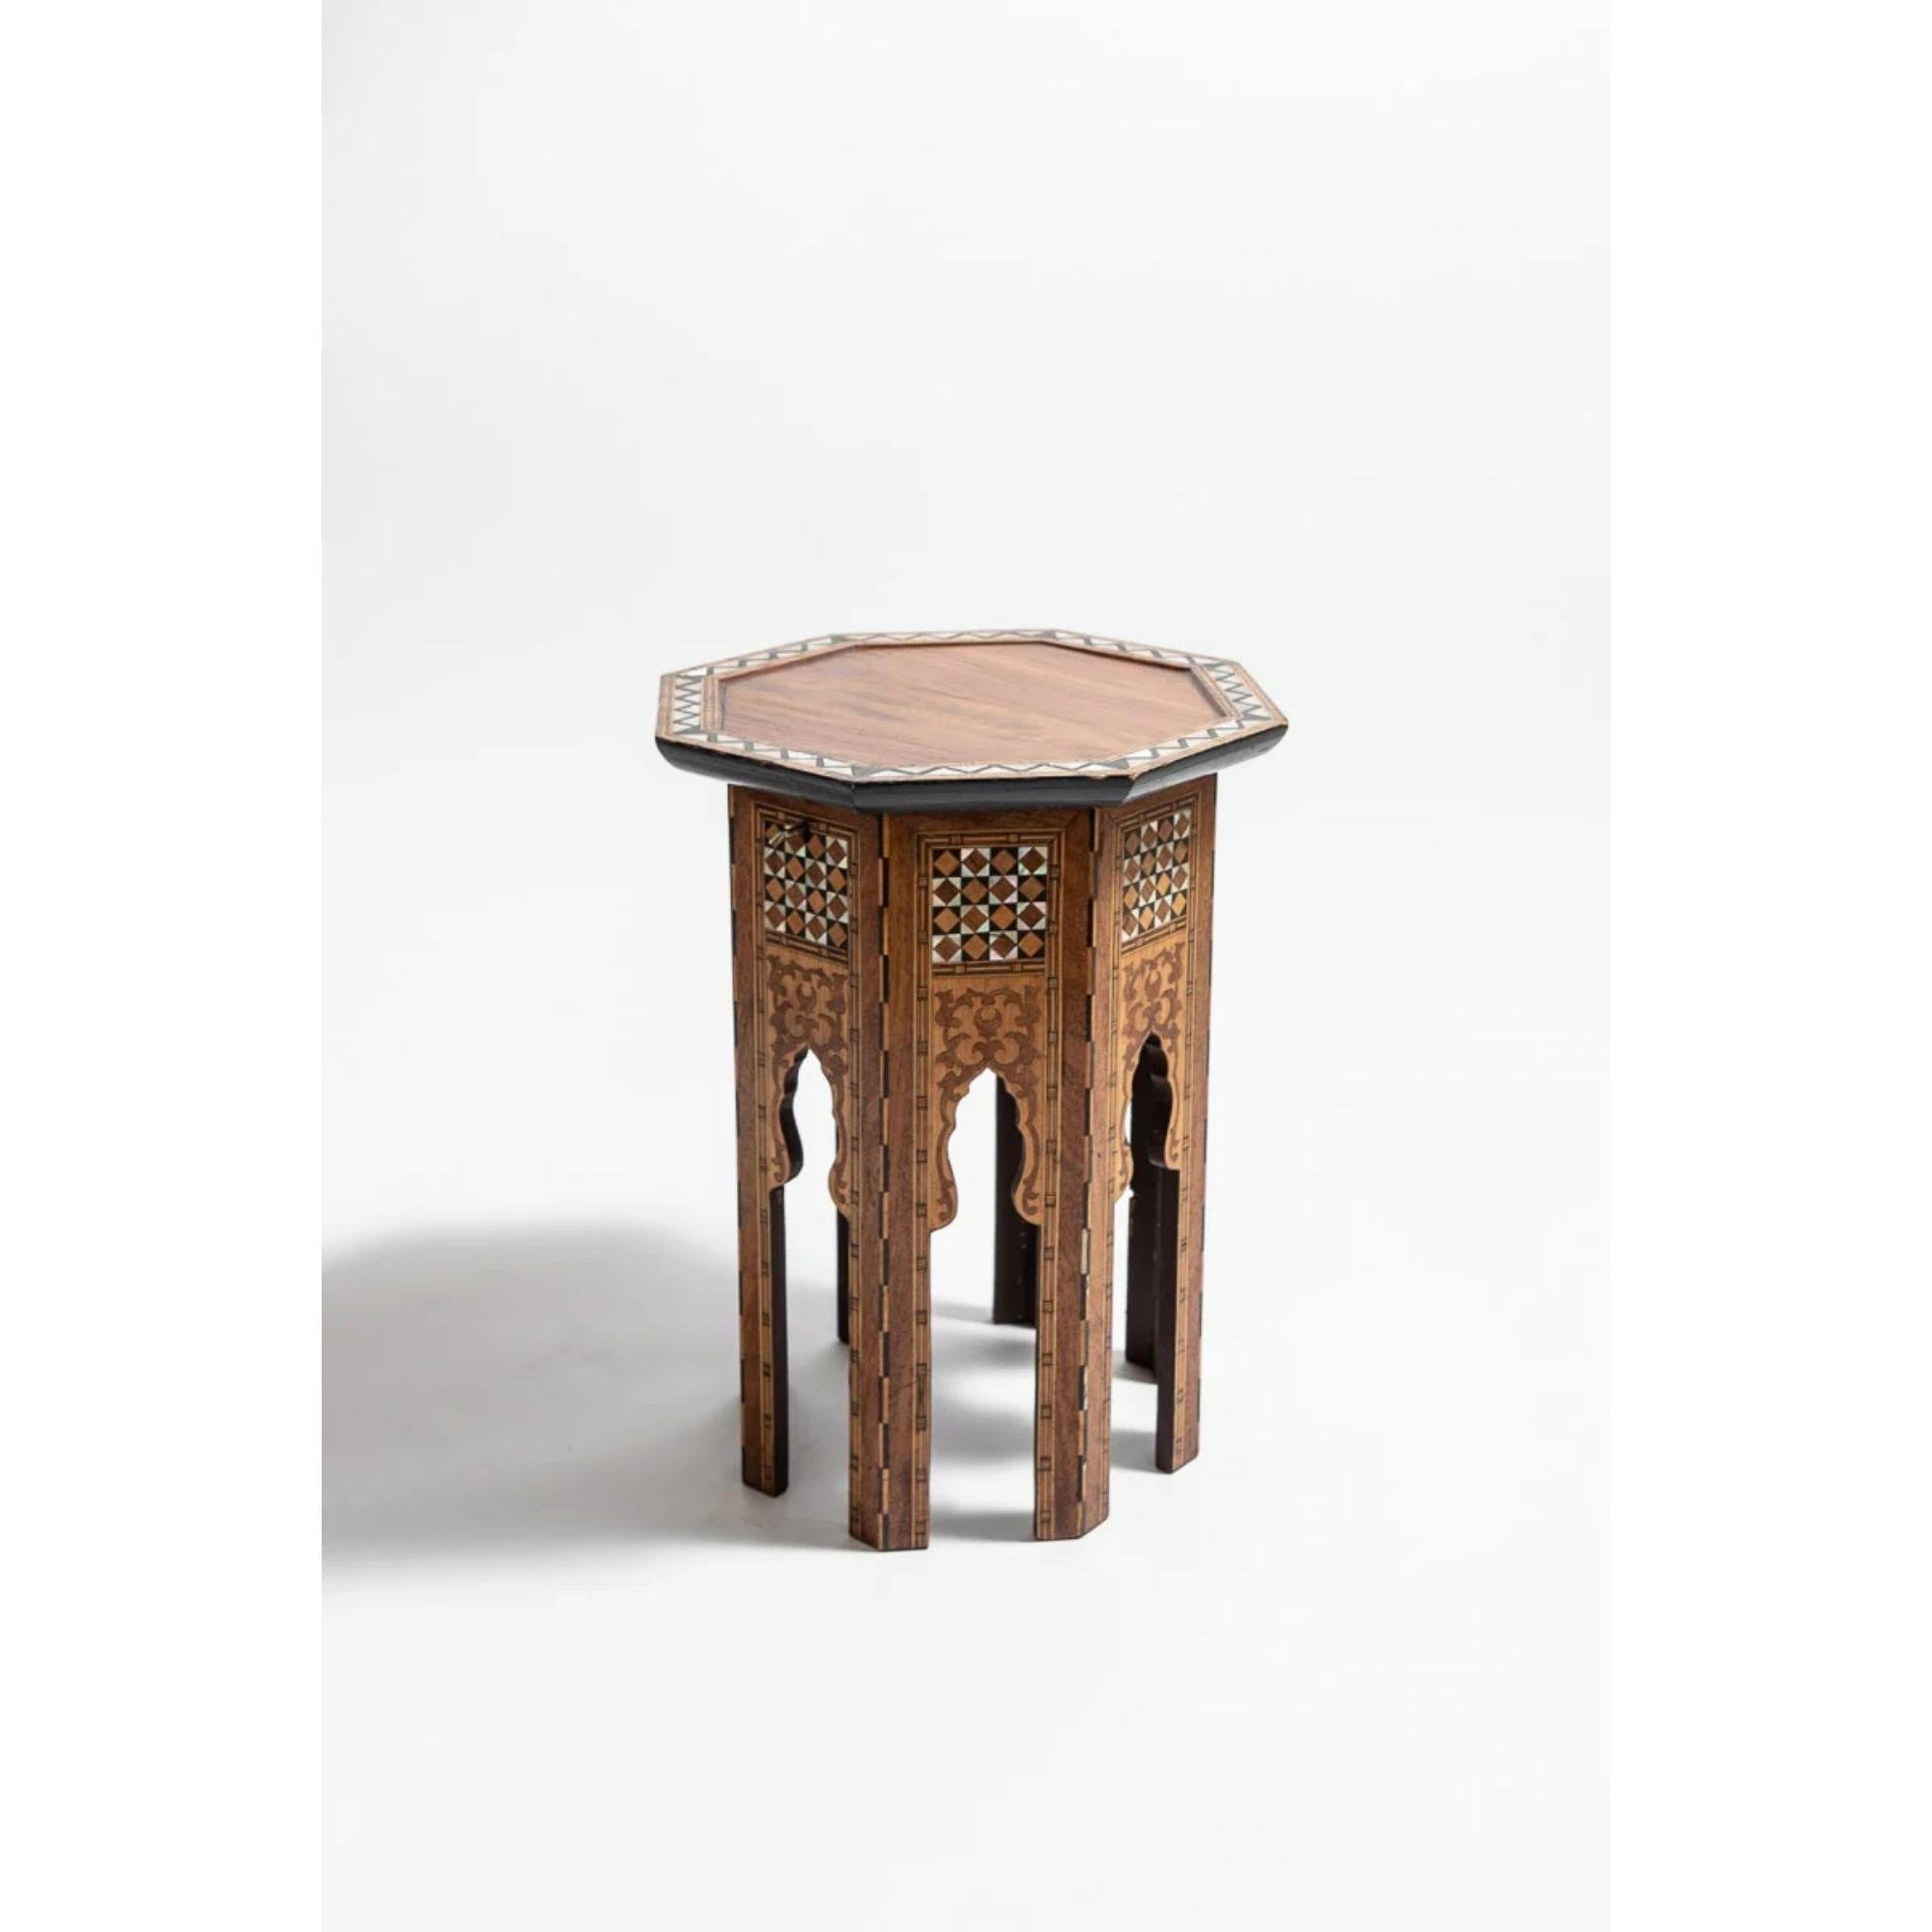 Aesthetic Movement Syrian Octagonal Table, 19th Century For Sale